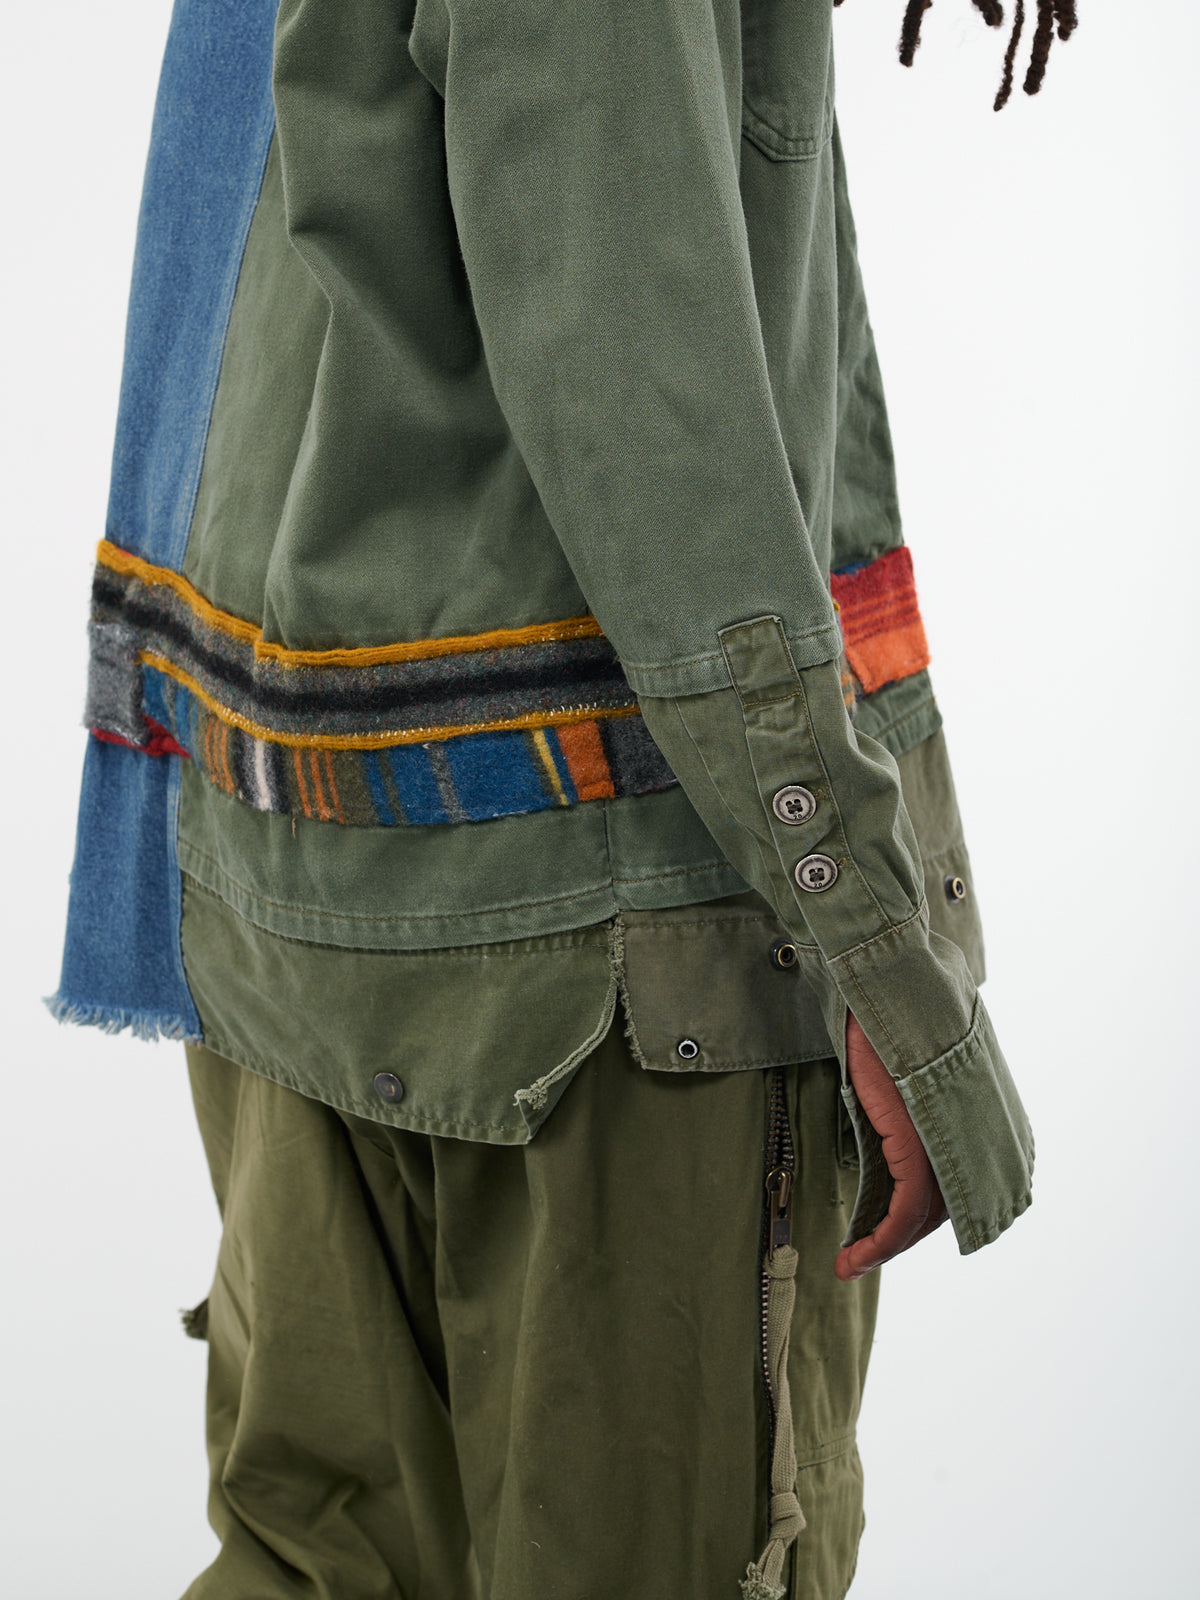 Army Jackets & Overalls Jacket (FM032-ARMY-BLUE)